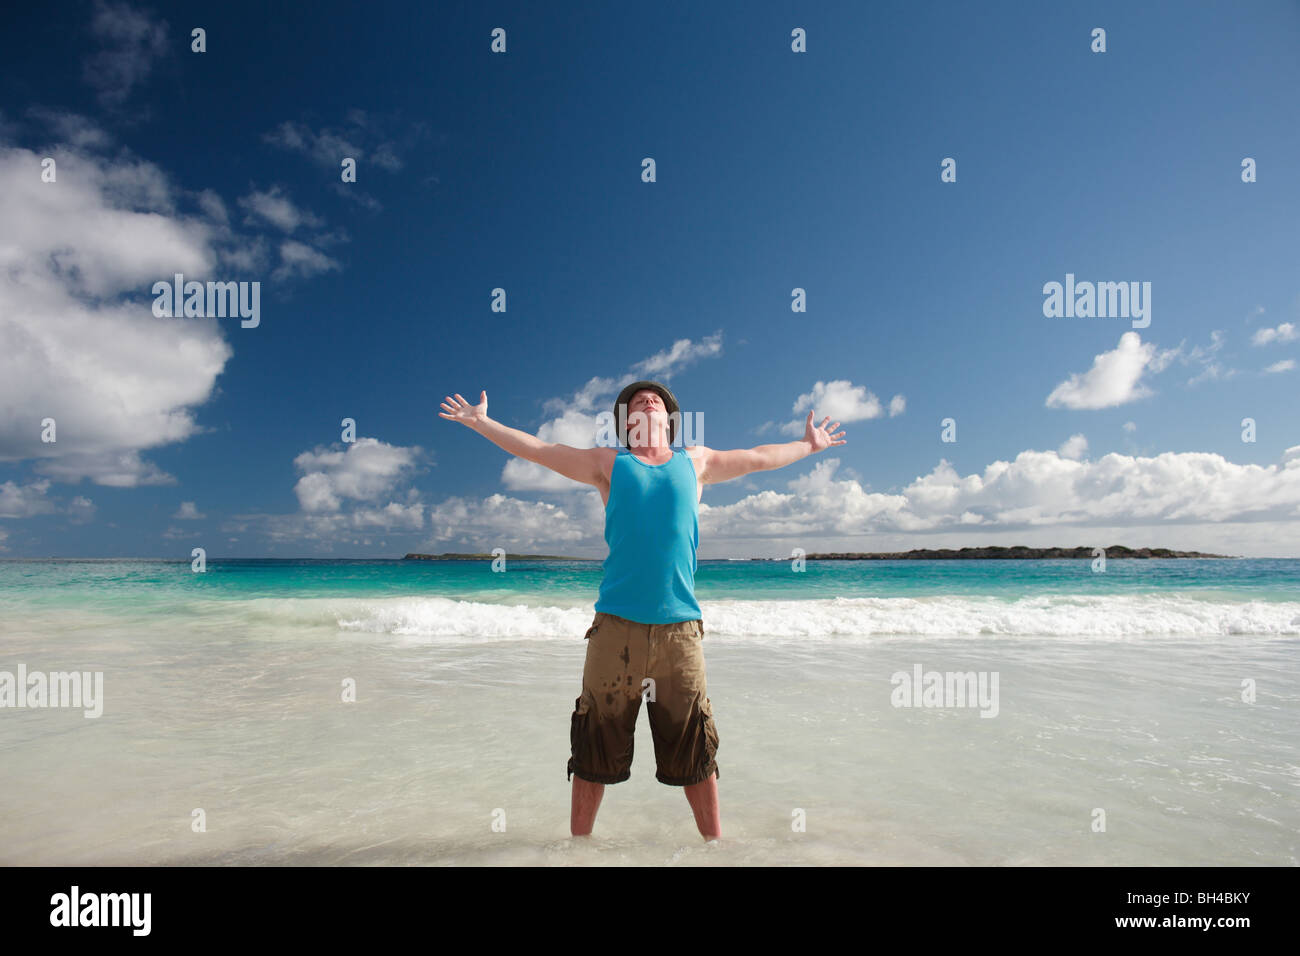 Young man with his arms raised in celebration towards the sky on a tropical beach, smiling Stock Photo